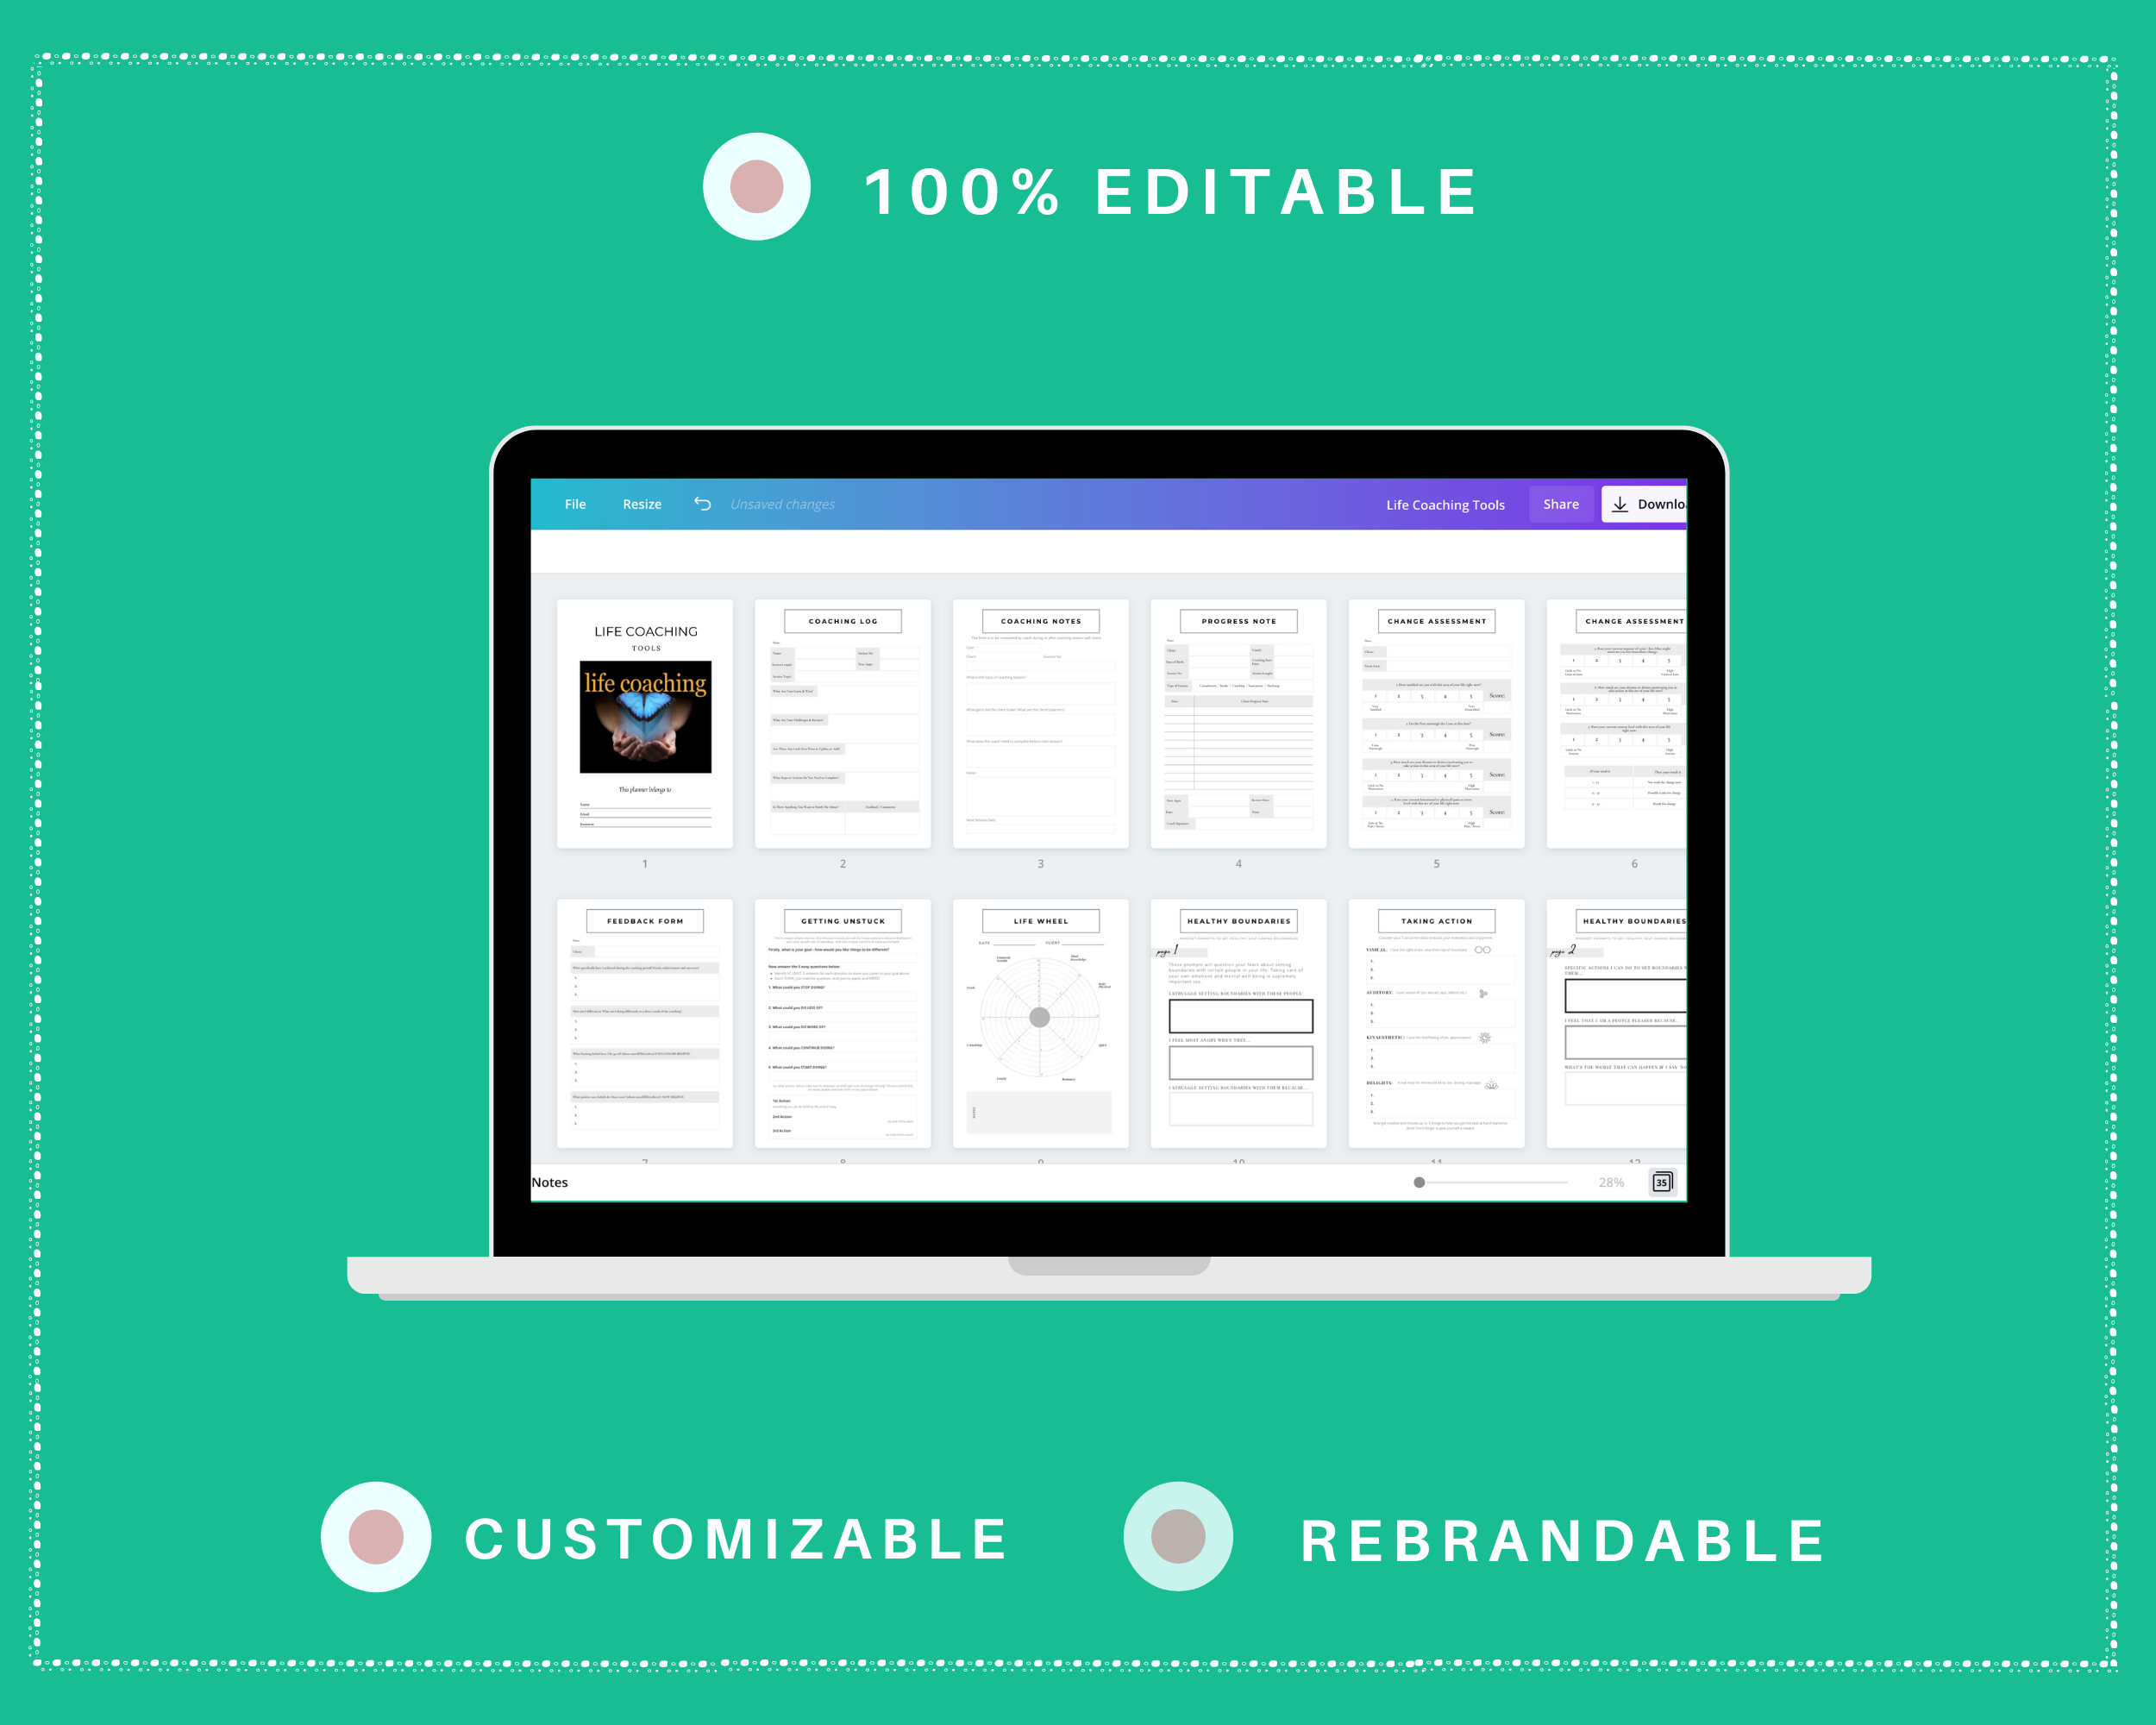 Editable Life Coaching Tools in Canva | Commercial Use